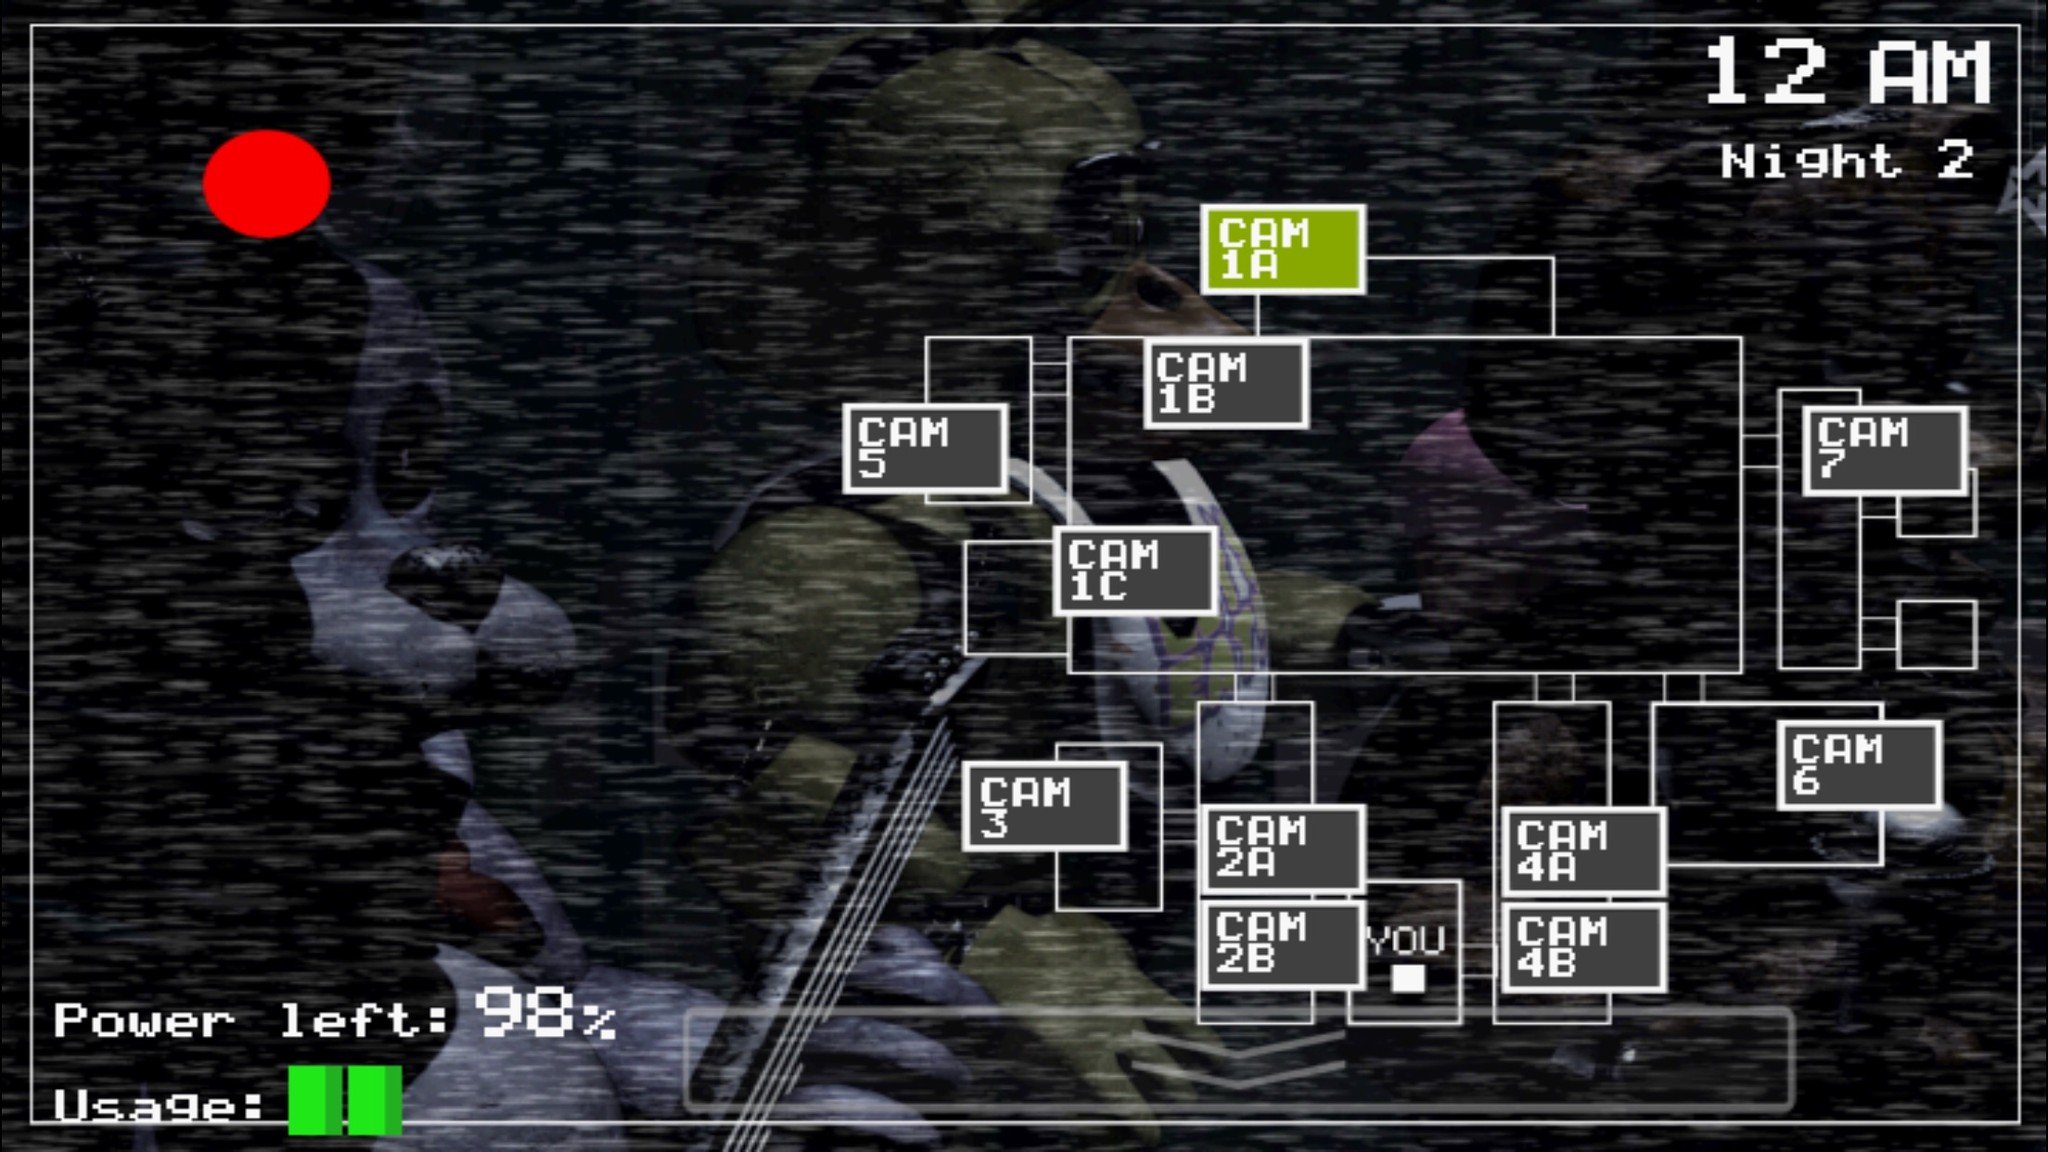 Five Nights at Freddy's: Top tips, hints, and cheats you need to know!